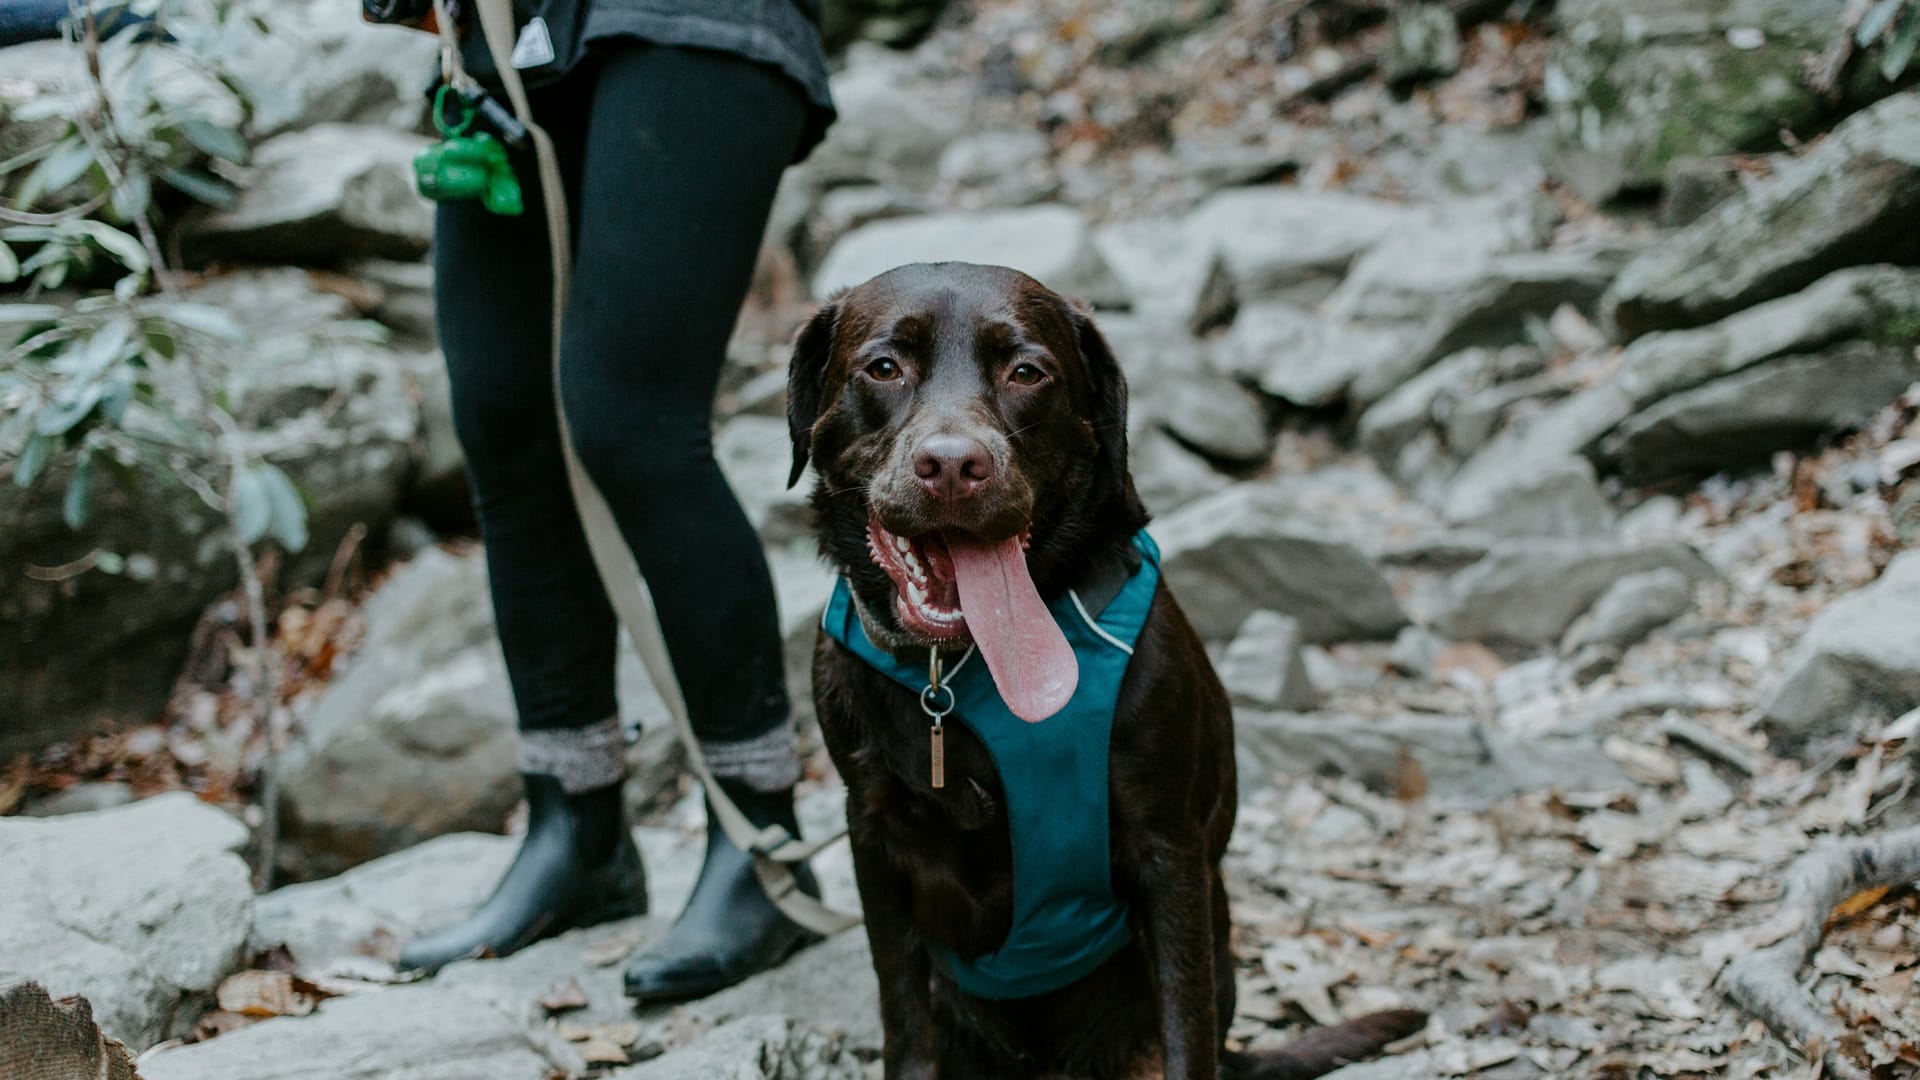 A dog with its tongue hanging out, standing still and resting after going on a hike. Photo by Wade Austin Ellis.